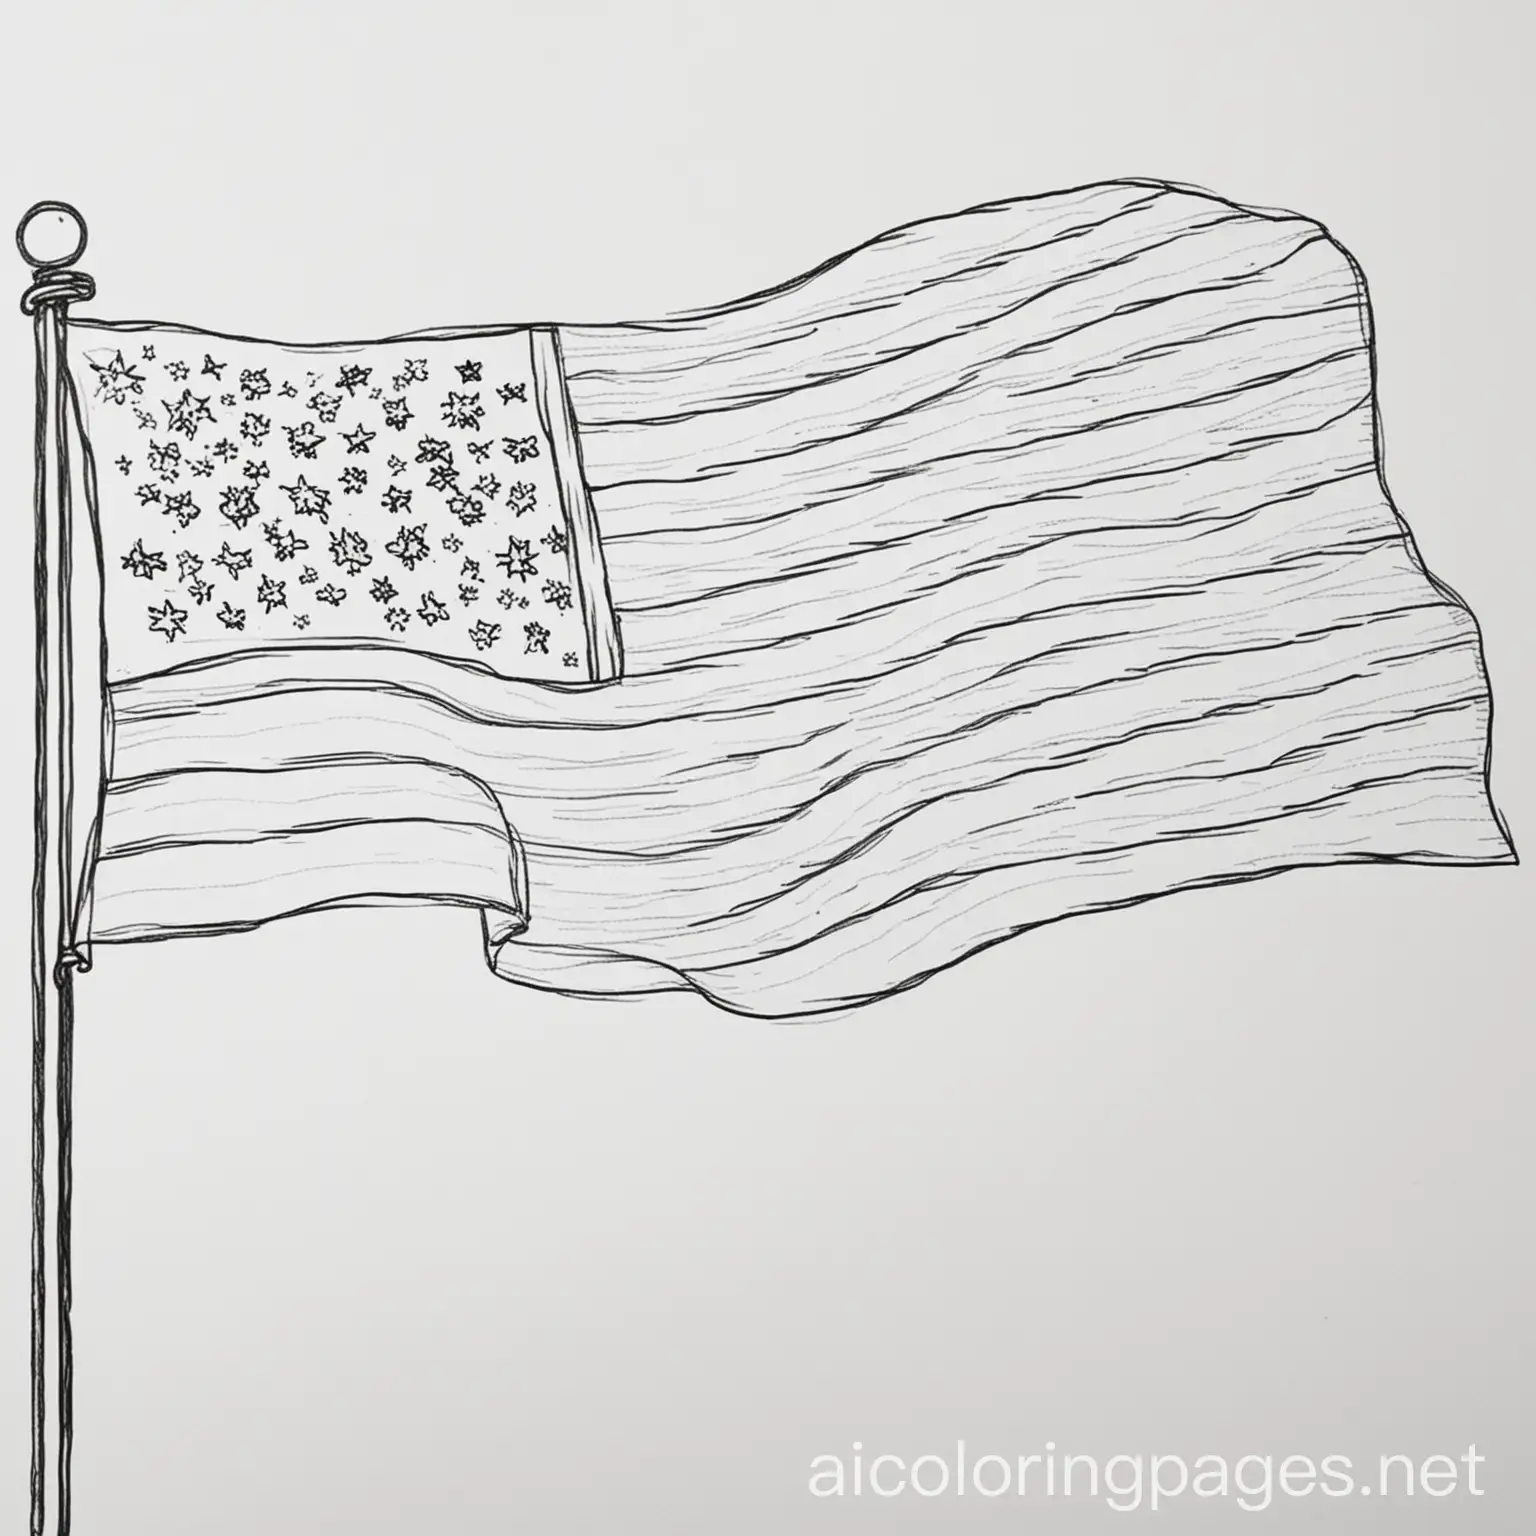 American Flag


Coloring Page, black and white, line art, white background, Simplicity, Ample White Space. The background of the coloring page is plain white to make it easy for young children to color within the lines. The outlines of all the subjects are easy to distinguish, making it simple for kids to color without too much difficulty, Coloring Page, black and white, line art, white background, Simplicity, Ample White Space. The background of the coloring page is plain white to make it easy for young children to color within the lines. The outlines of all the subjects are easy to distinguish, making it simple for kids to color without too much difficulty 